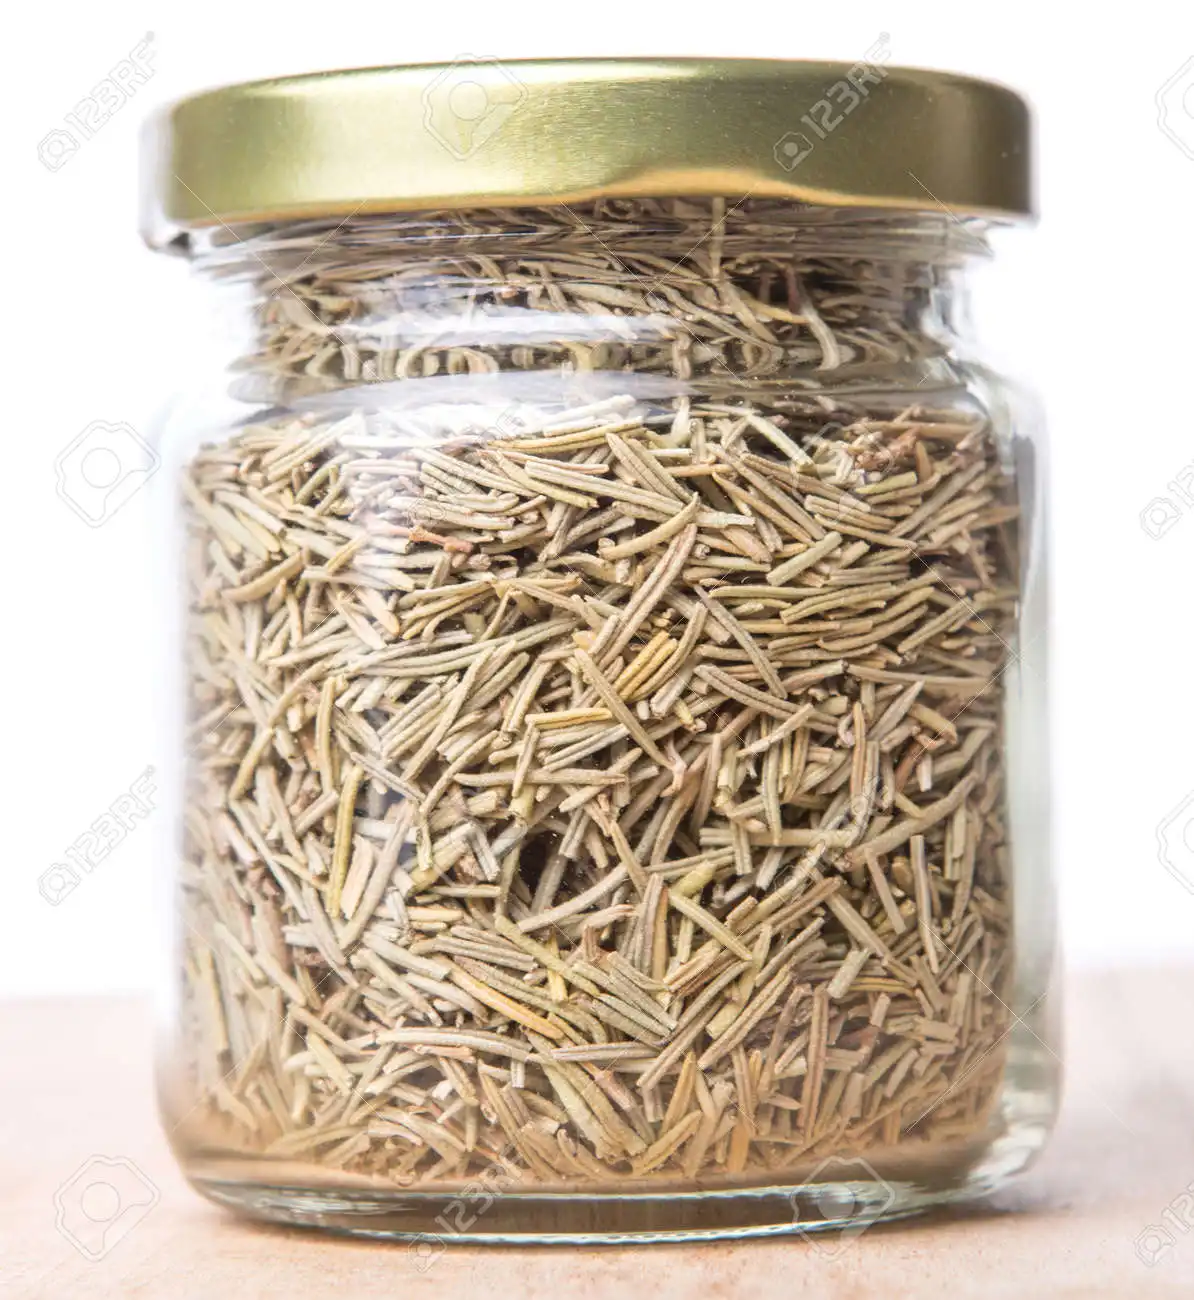 Wholesale Rosemary High Quality Product // Rachel:+84 896436456 99 Gold Data